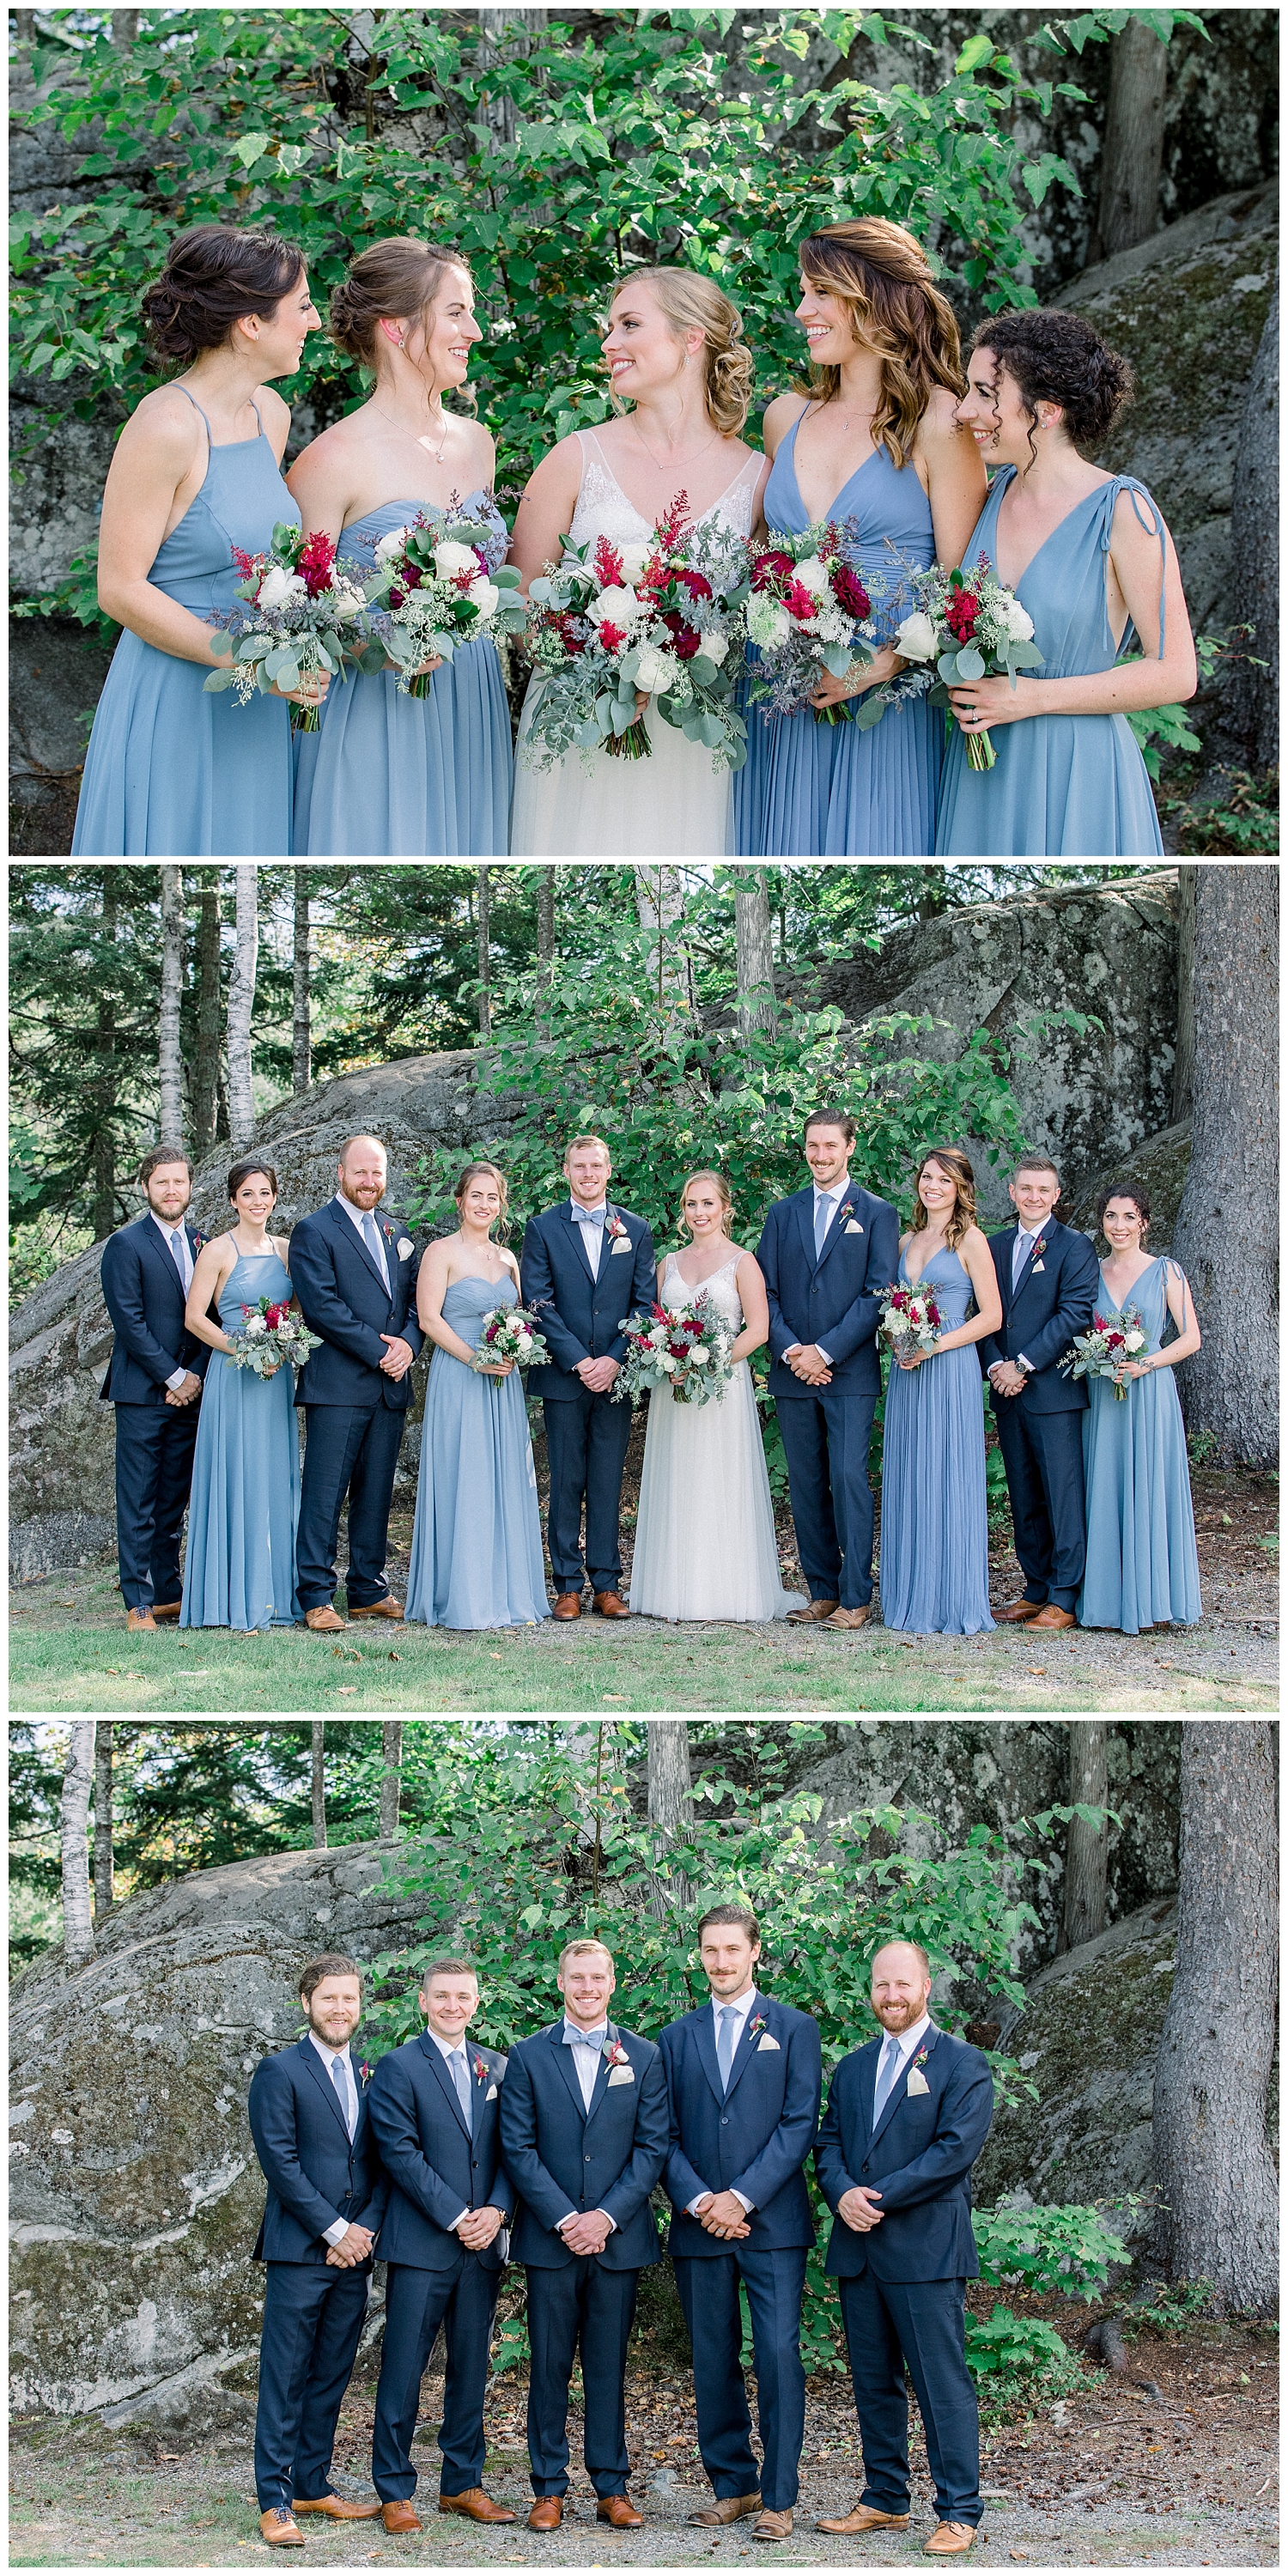 Bridal party at the Outdoor Adventure Center at a Sugarloaf Mountain Resort Wedding in Maine, photos by Halie Olszowy.